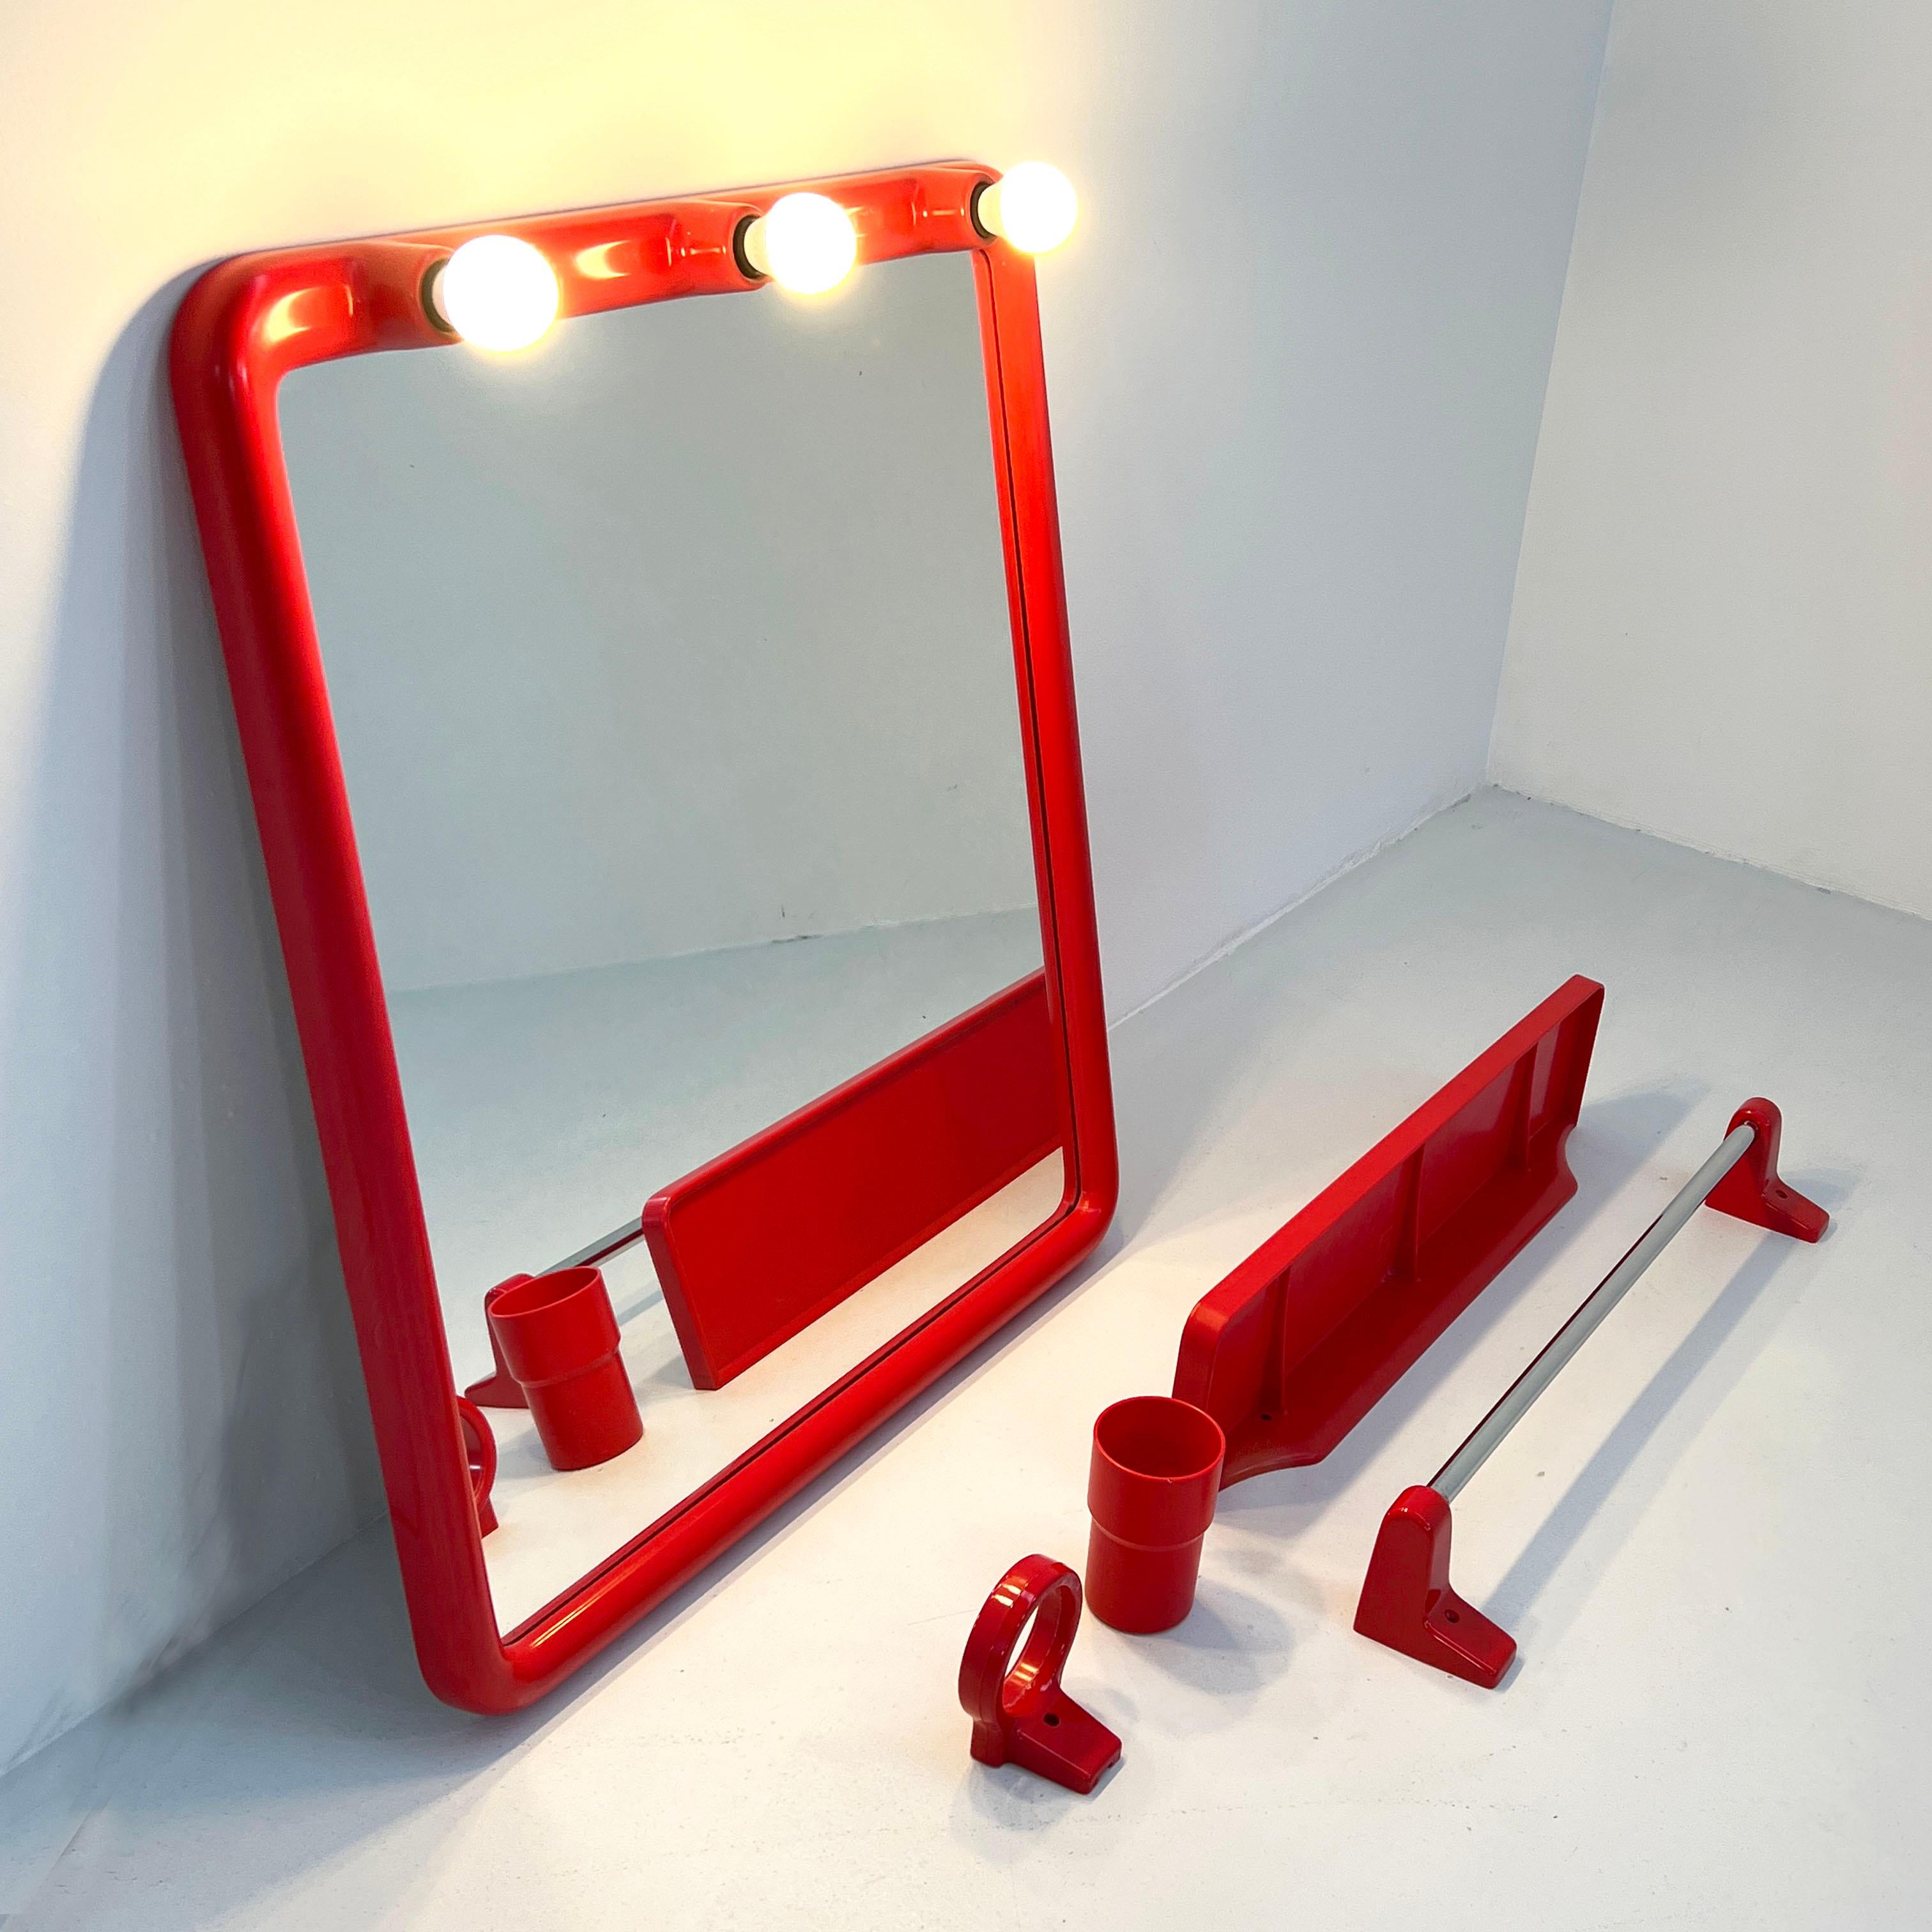 Producer - Carrara & Matta
Design Period - Seventies 
Measurements - Width 60 cm x Depth 12 cm x Height 70 cm
Materials - Plastic, mirror
Color - Red
Condition - Good 
Comments - Light wear consistent with age and use. One chip at the bottom